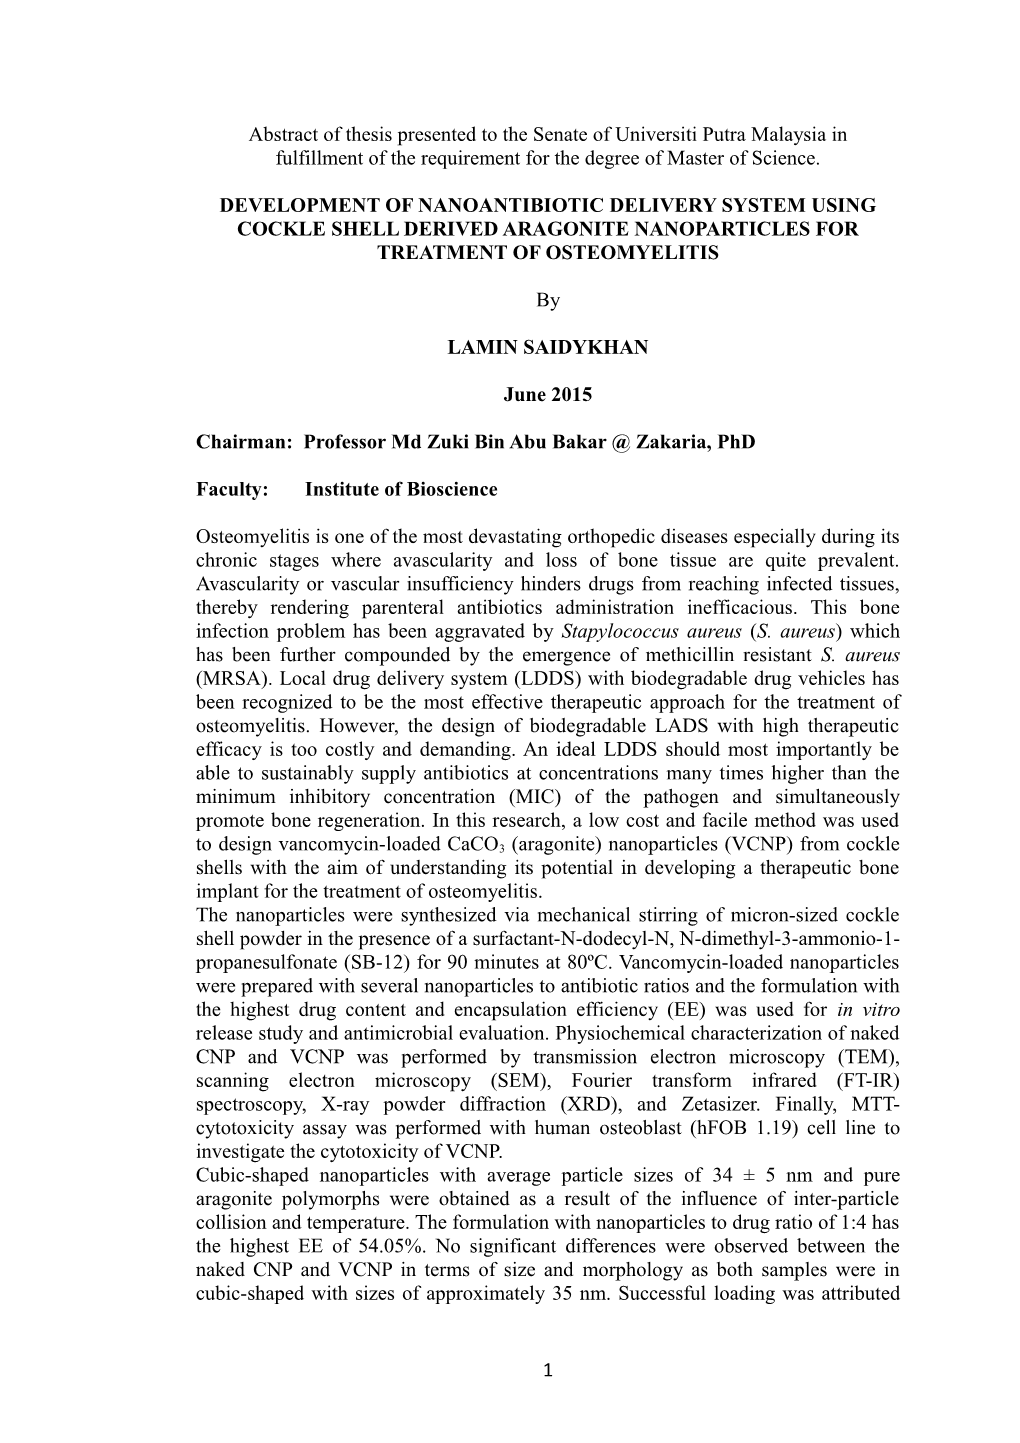 Abstract of Thesis Presented to the Senate of Universiti Putra Malaysia In